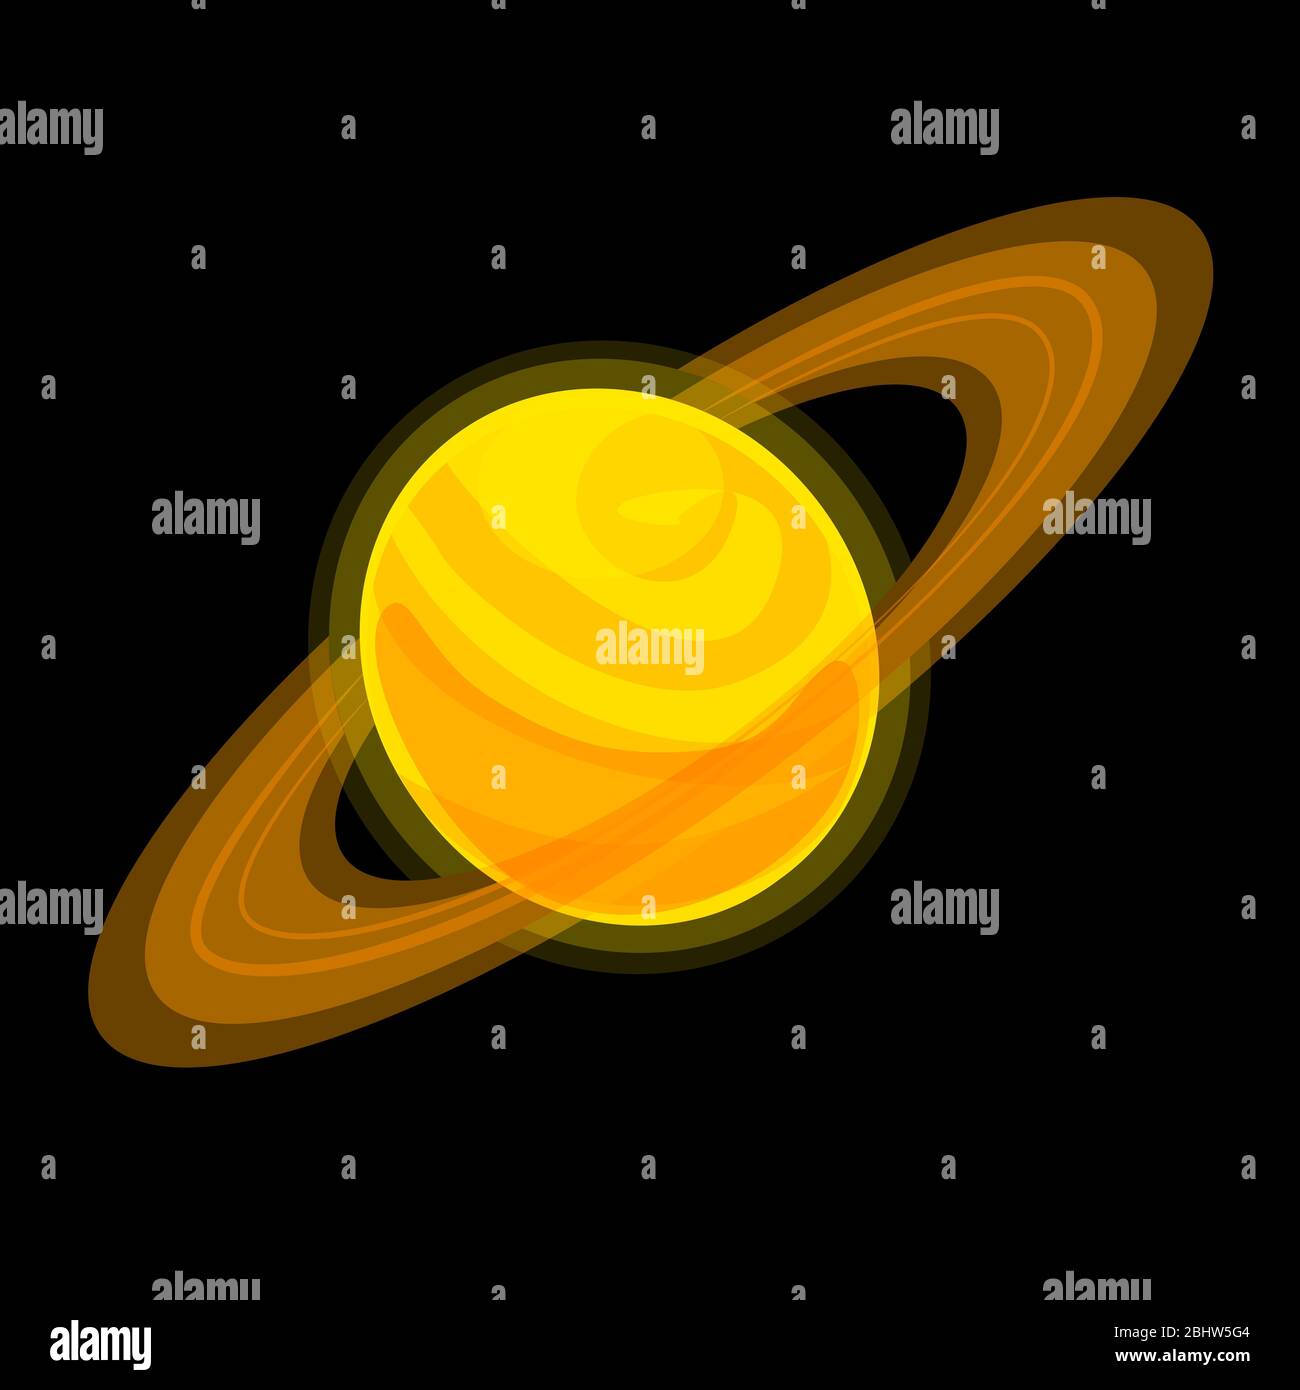 Saturn Cartoon illustration Isolated on black background. Jupiter vector icon. Yellow planet with ring Stock sticker. Cosmo Globo logo with rings. Orange giant flat element. Stock Vector